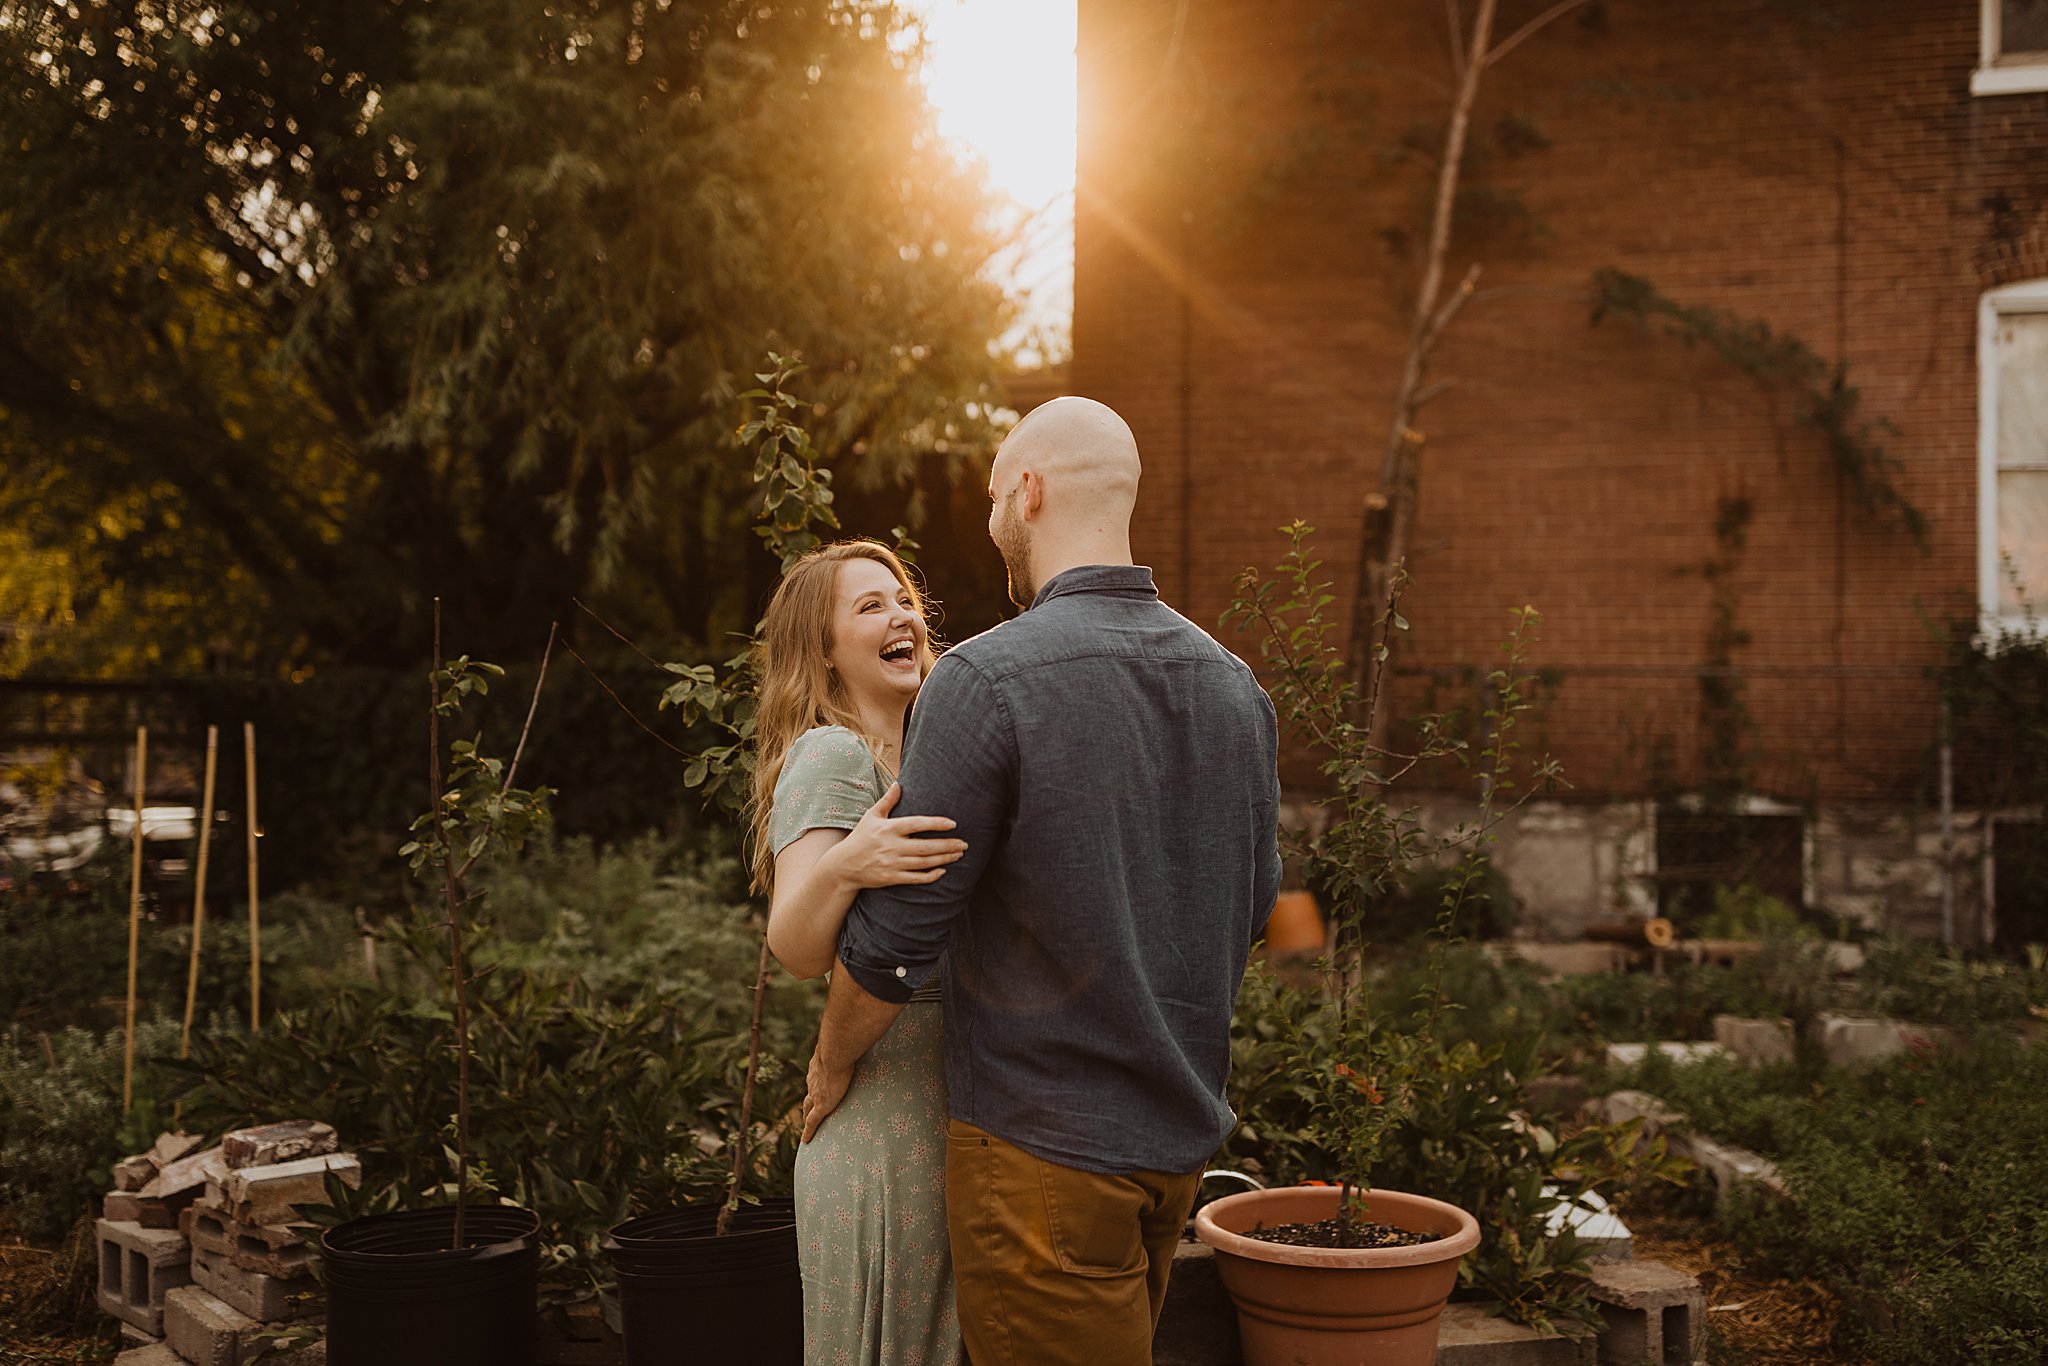 Plant Nursery Engagement Pictures at Sunset